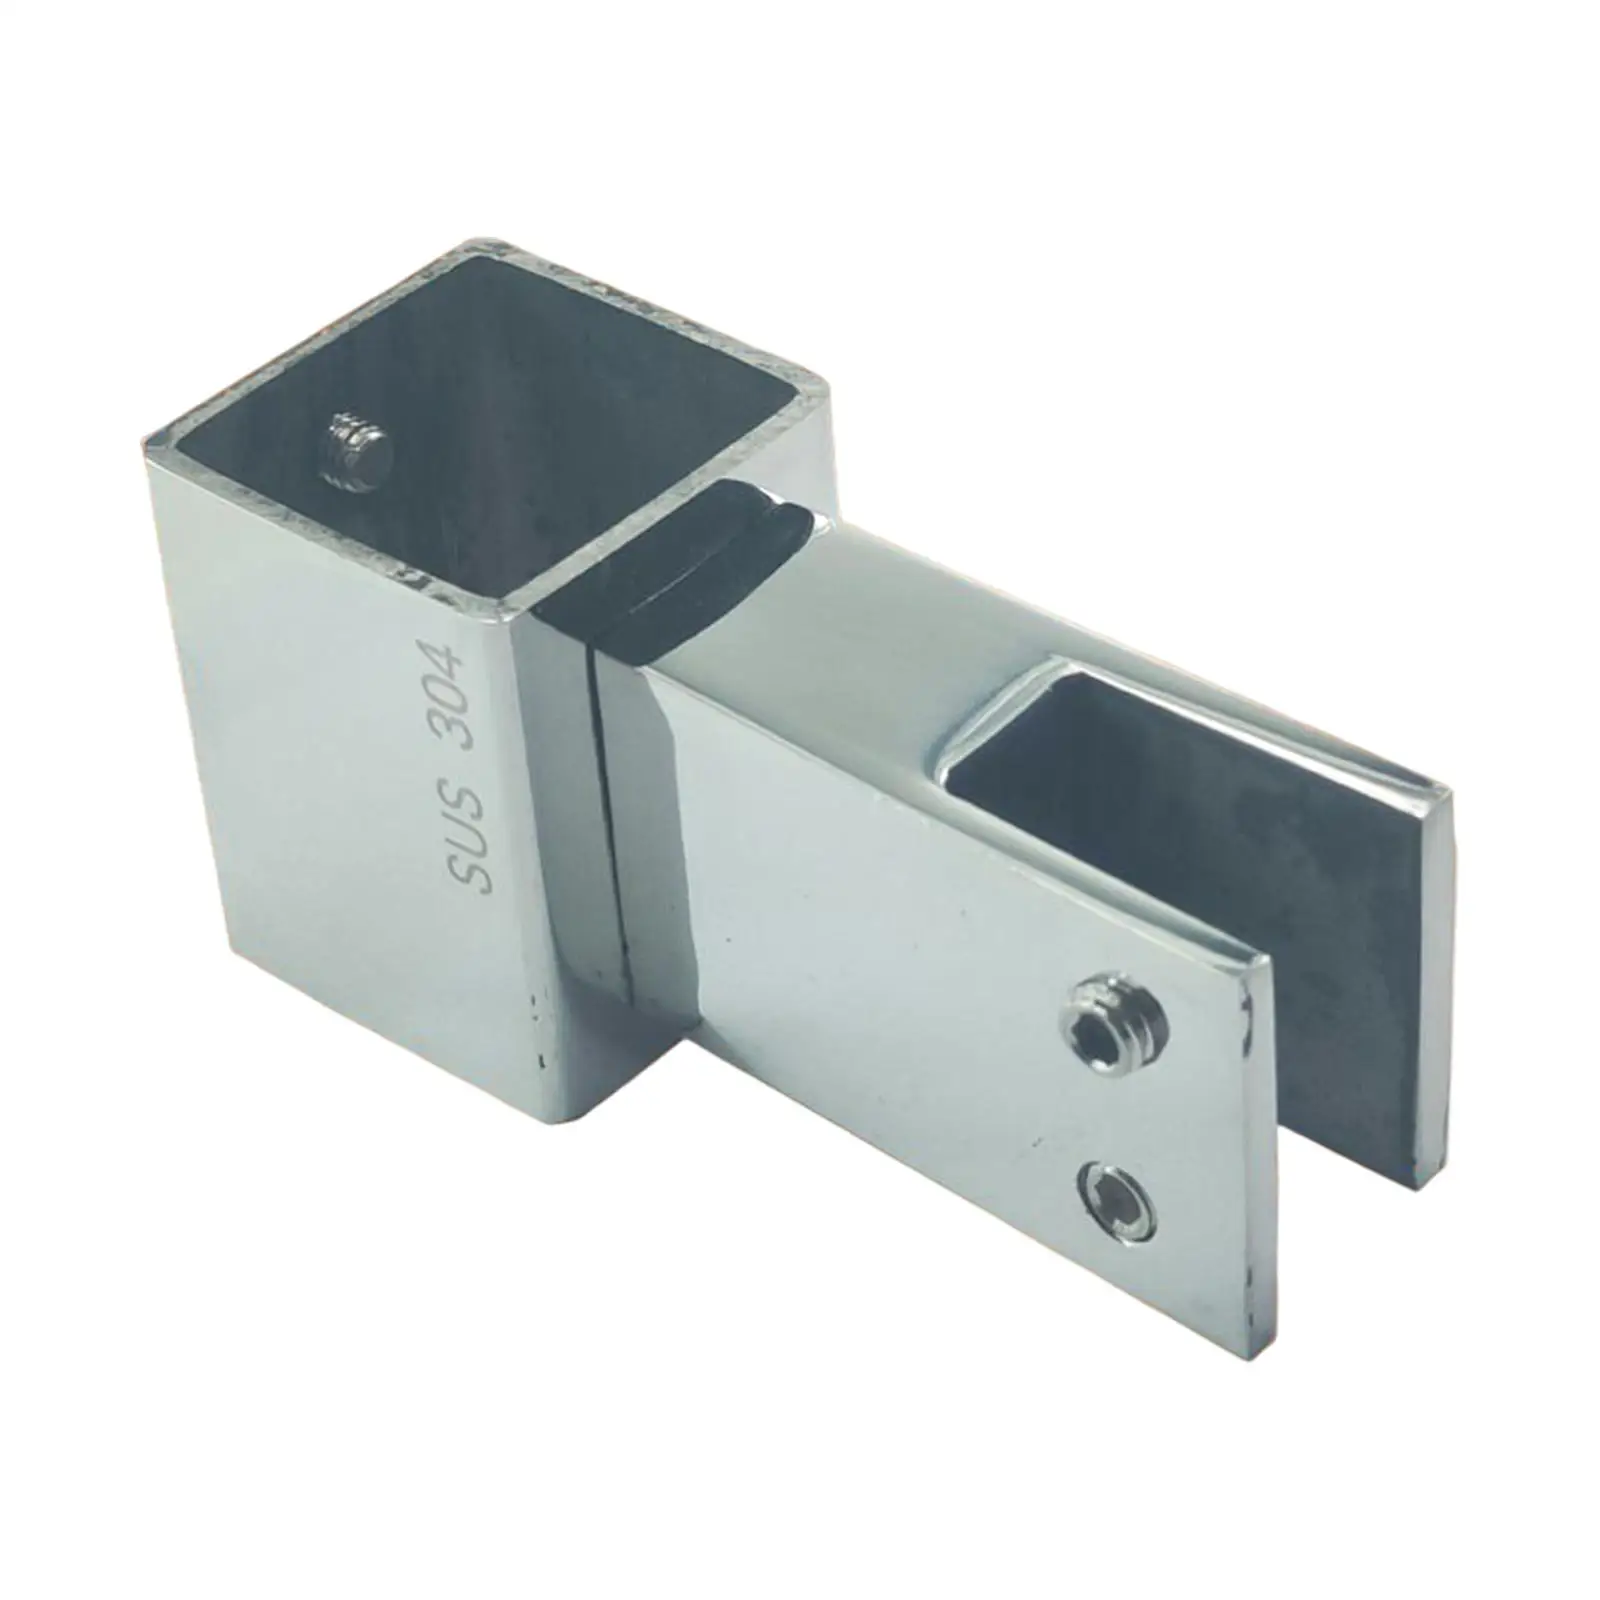 Square Pipe Connector Hardware 304 Stainless Steel for 28mm Square Pipe Marine Grade Flange Seat Corner Glass Fixing Rod T Clamp